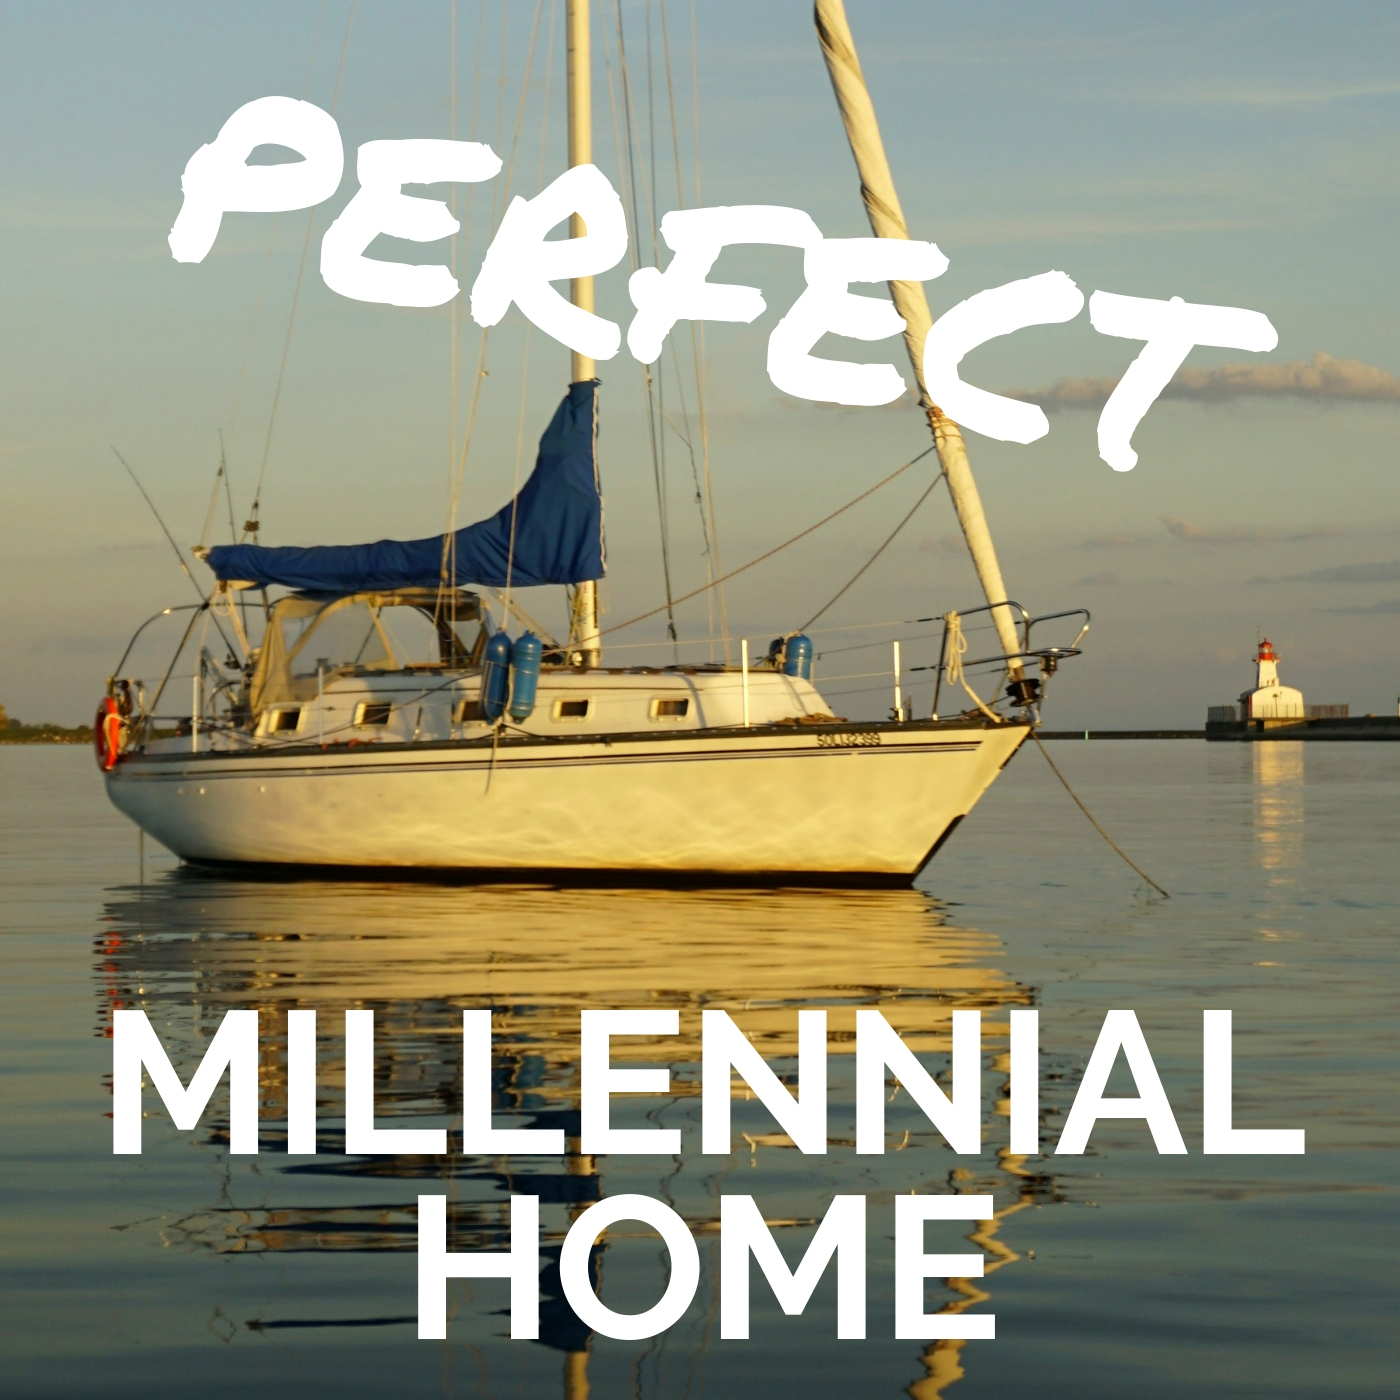 Perfect Millennial Home, sailboat, liveaboard, Wildly Intrepid, Hunter 33